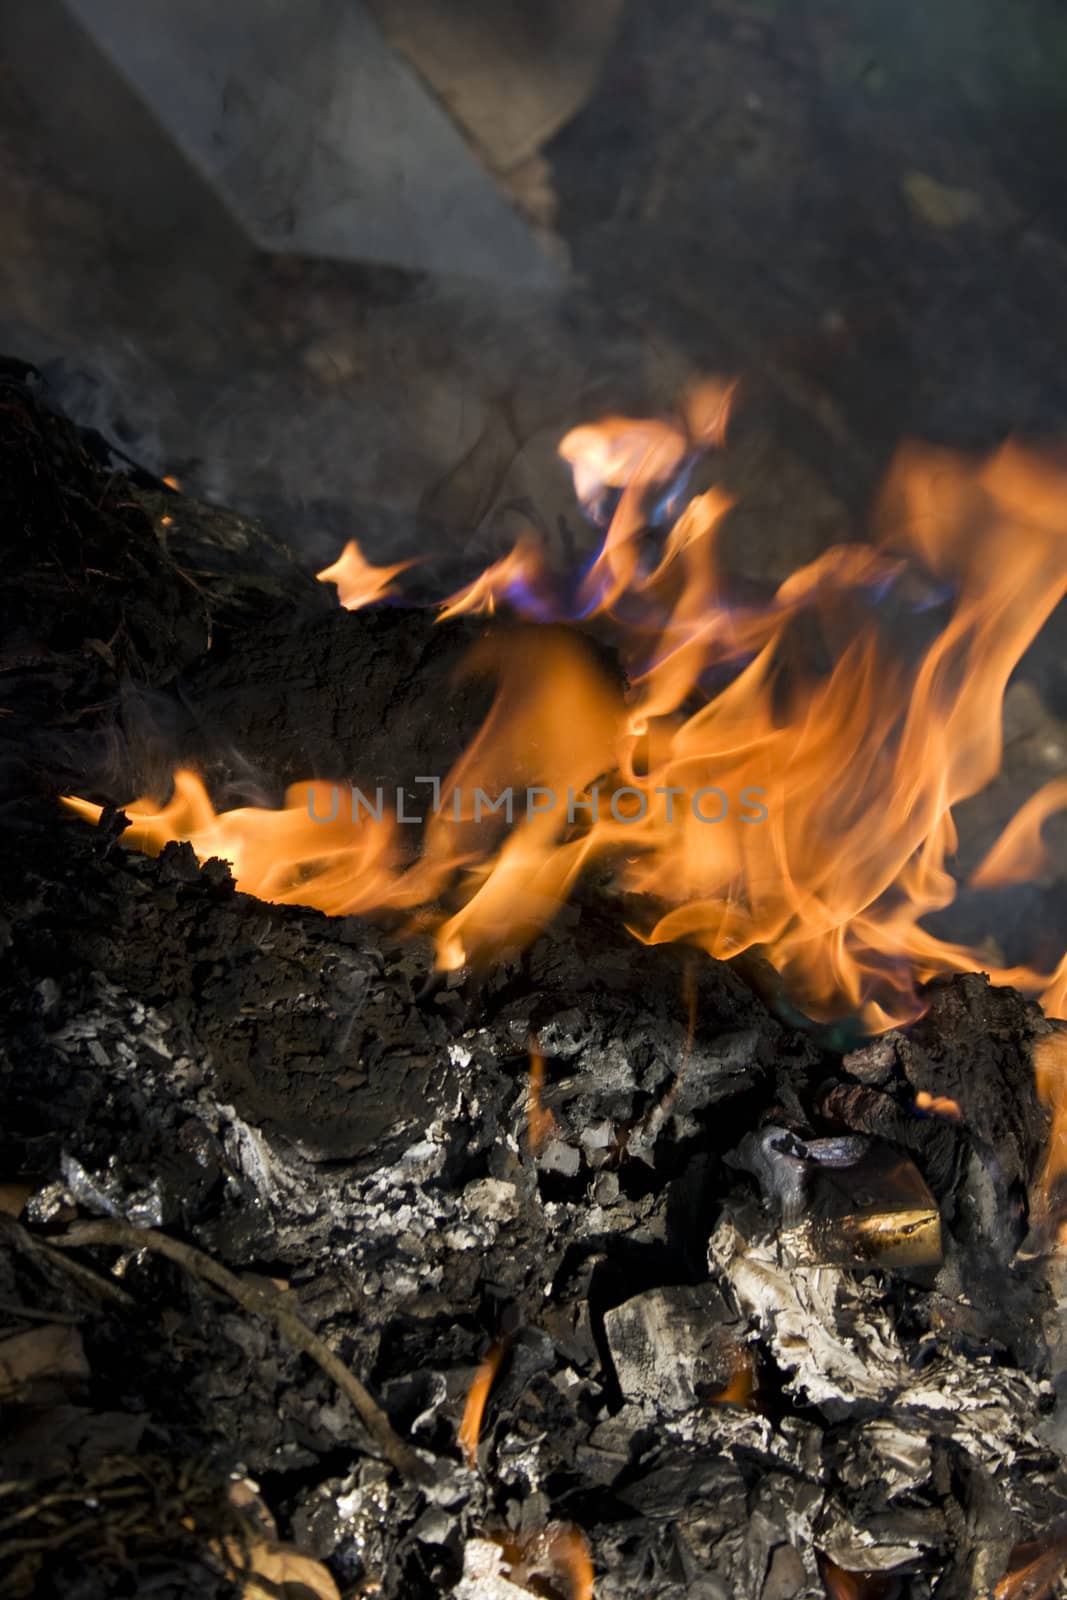 Burning rubbish. Fire part can crop and use as background on design.